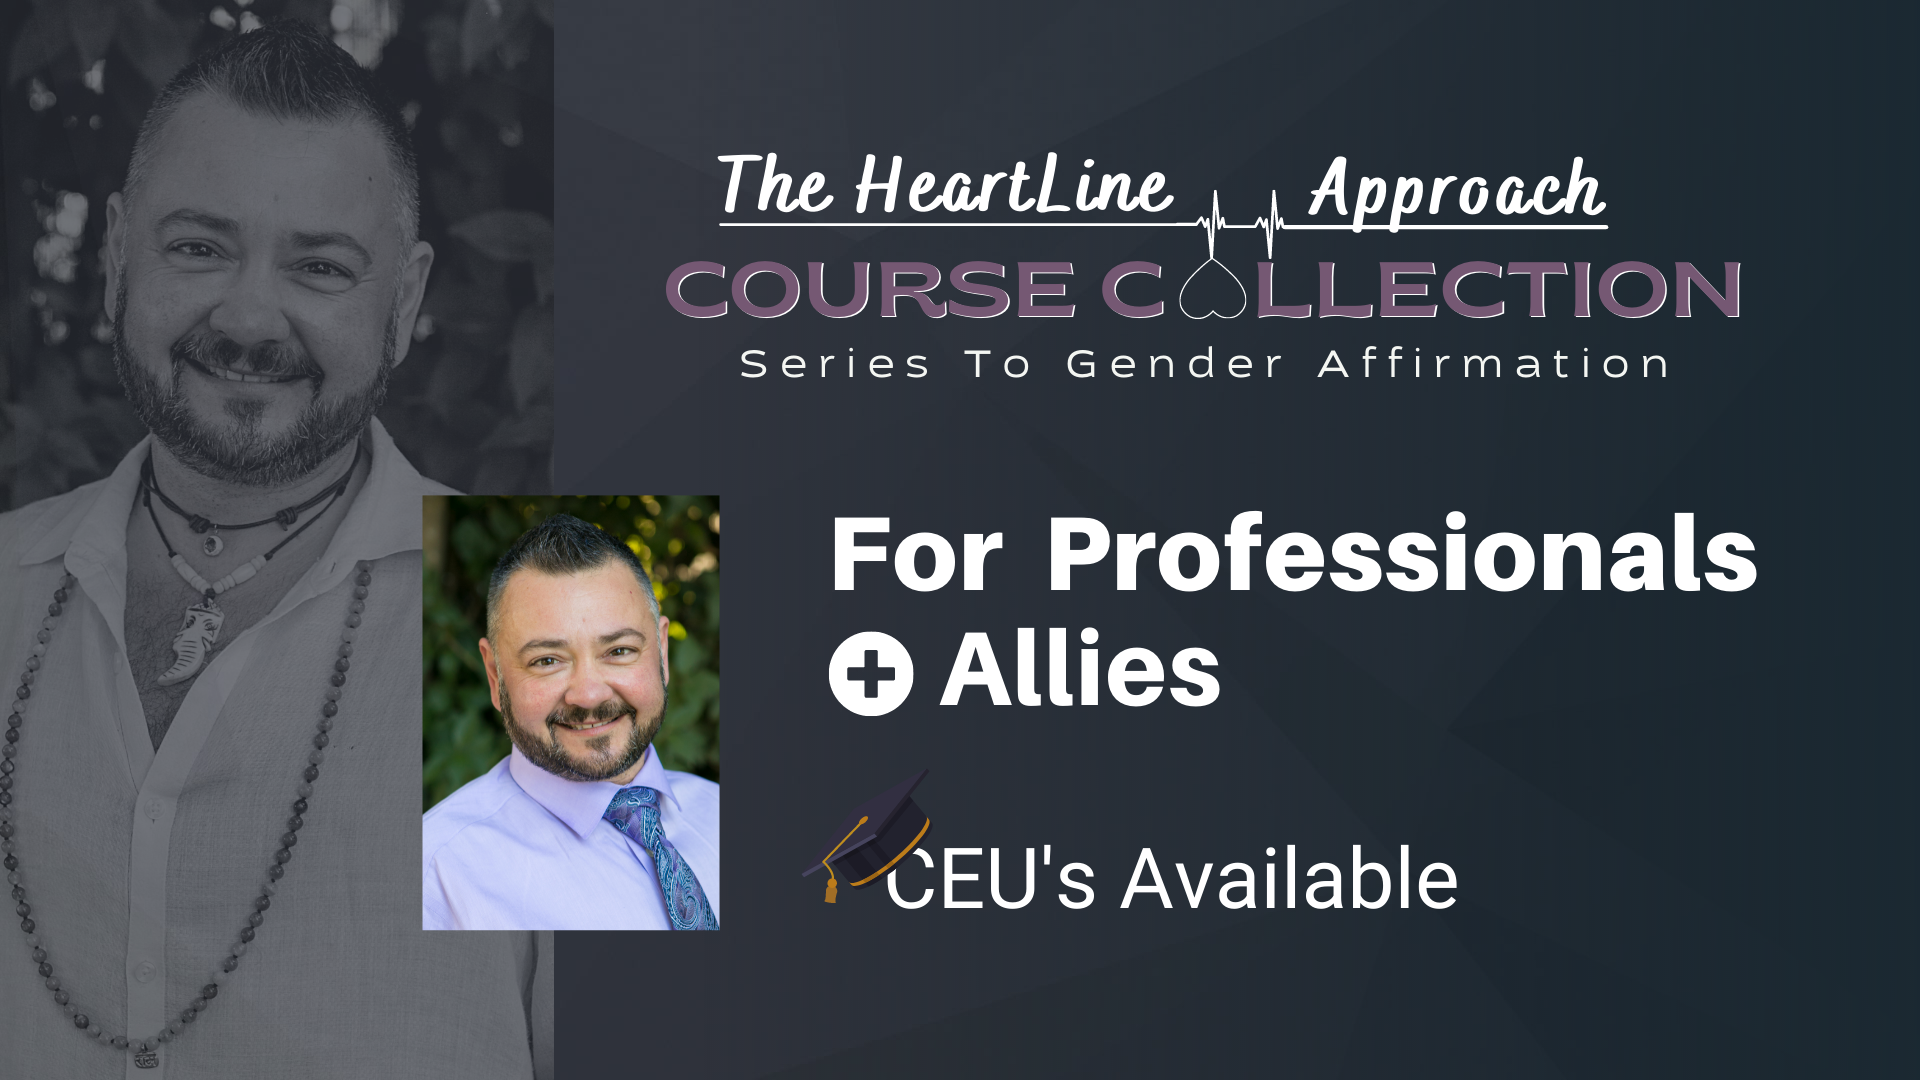 Image of Jordan Decker and The Heartline Approach to Gender Affirmation for the Caregivers